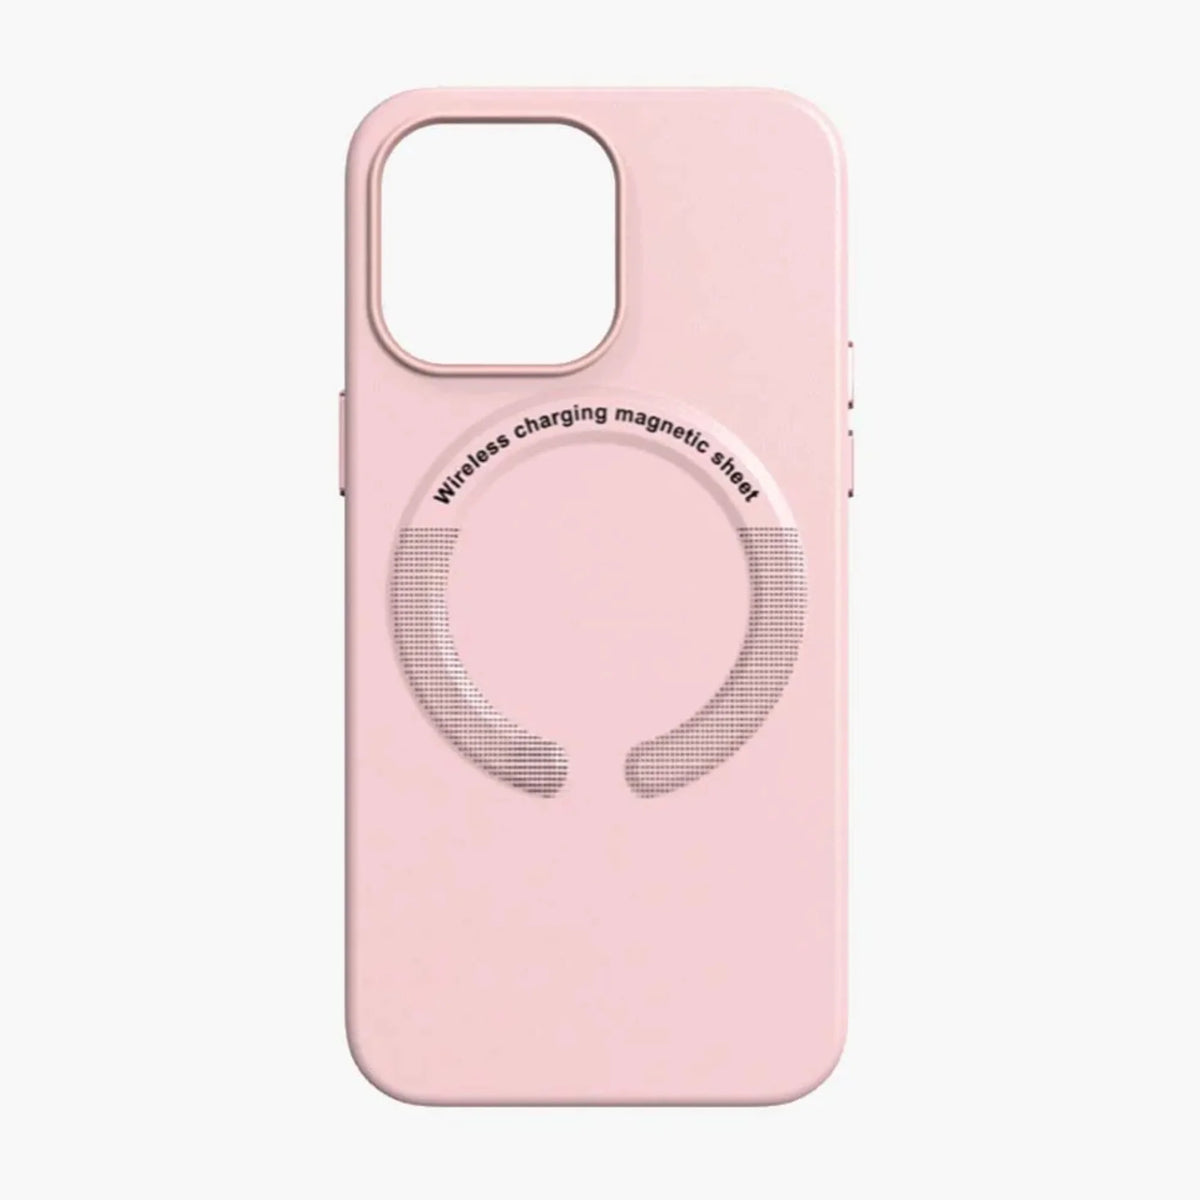 iPhone Leather Magsafe Case - Chalk Pink